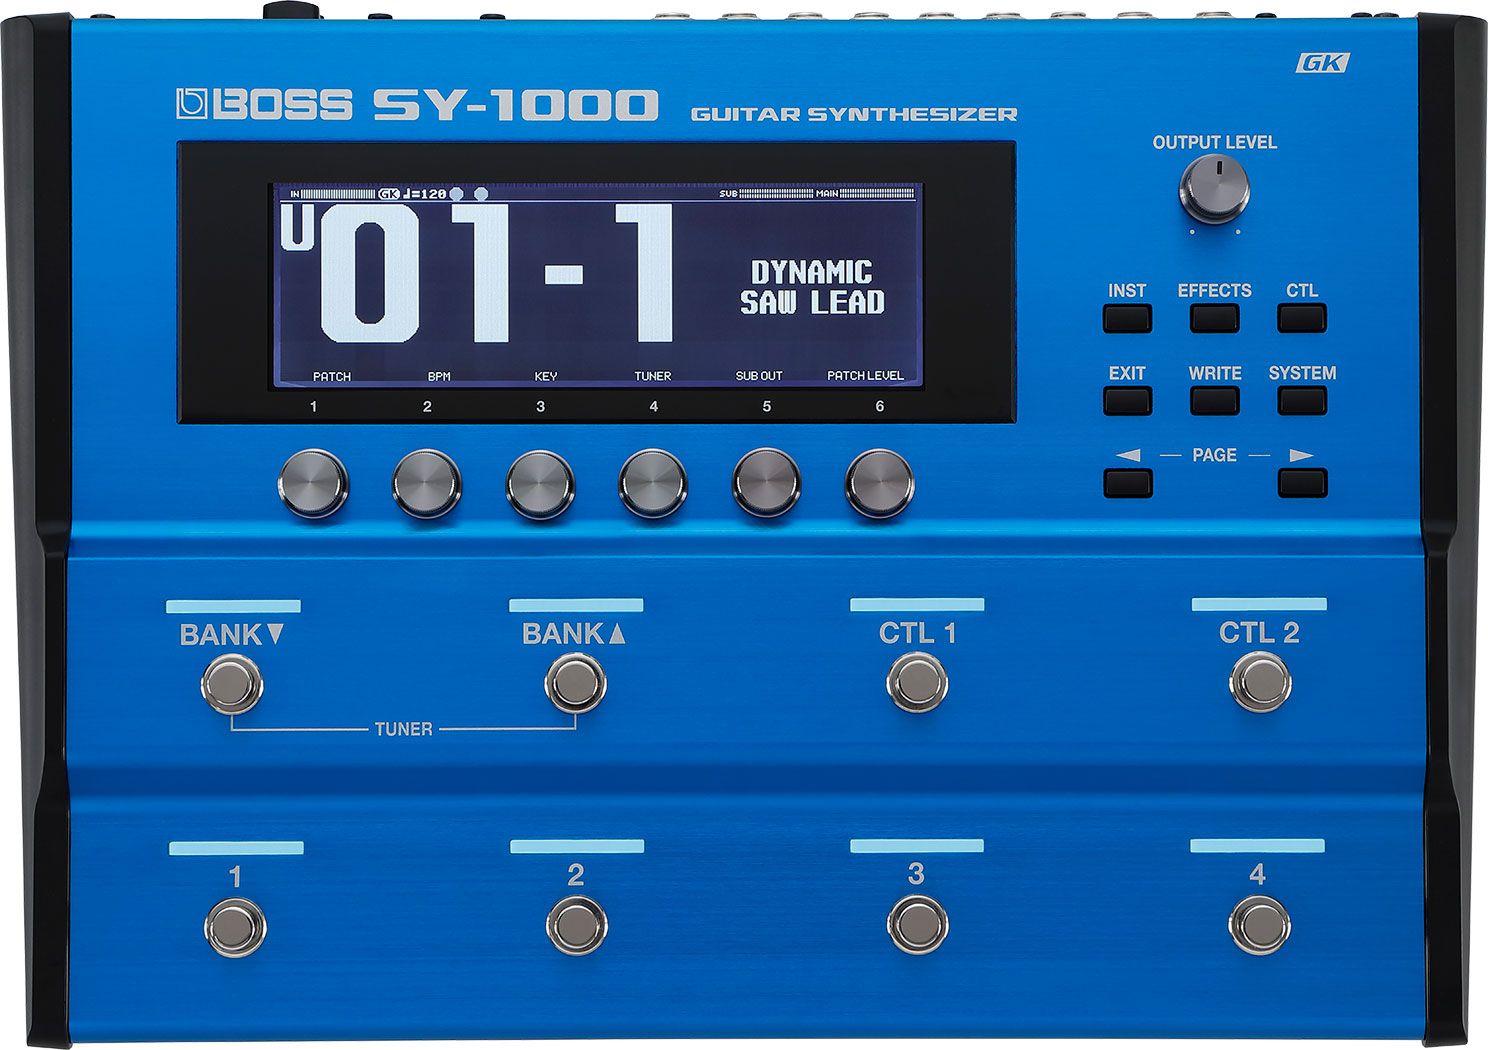 SY-1000 GUITAR SYNTHESIZER